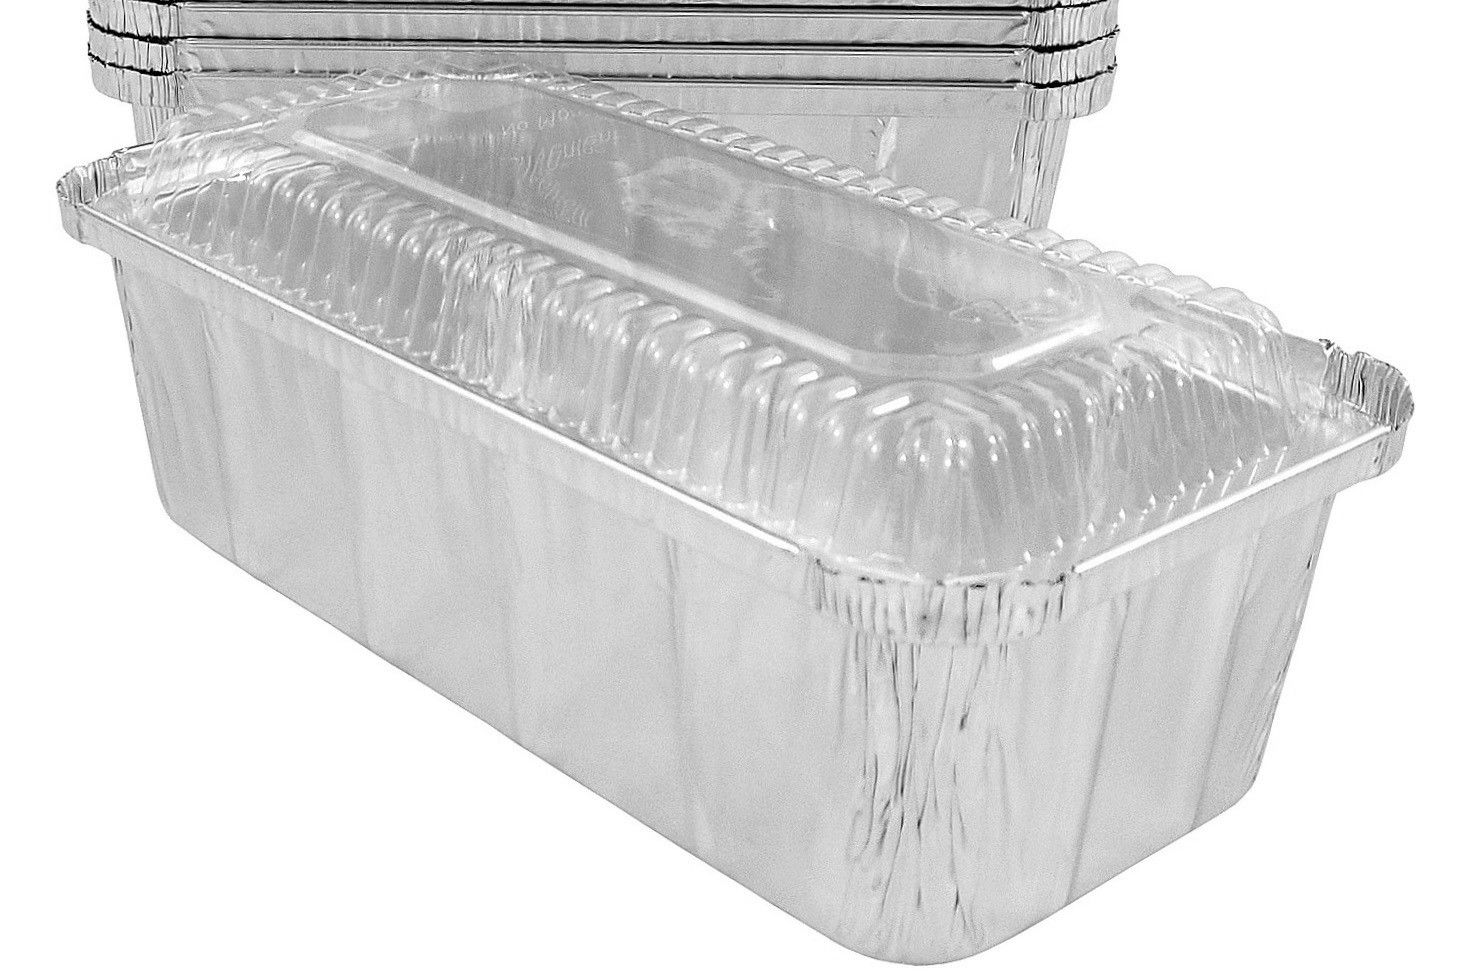 2 pound closable loaf pan with Plastic Lid #1850P